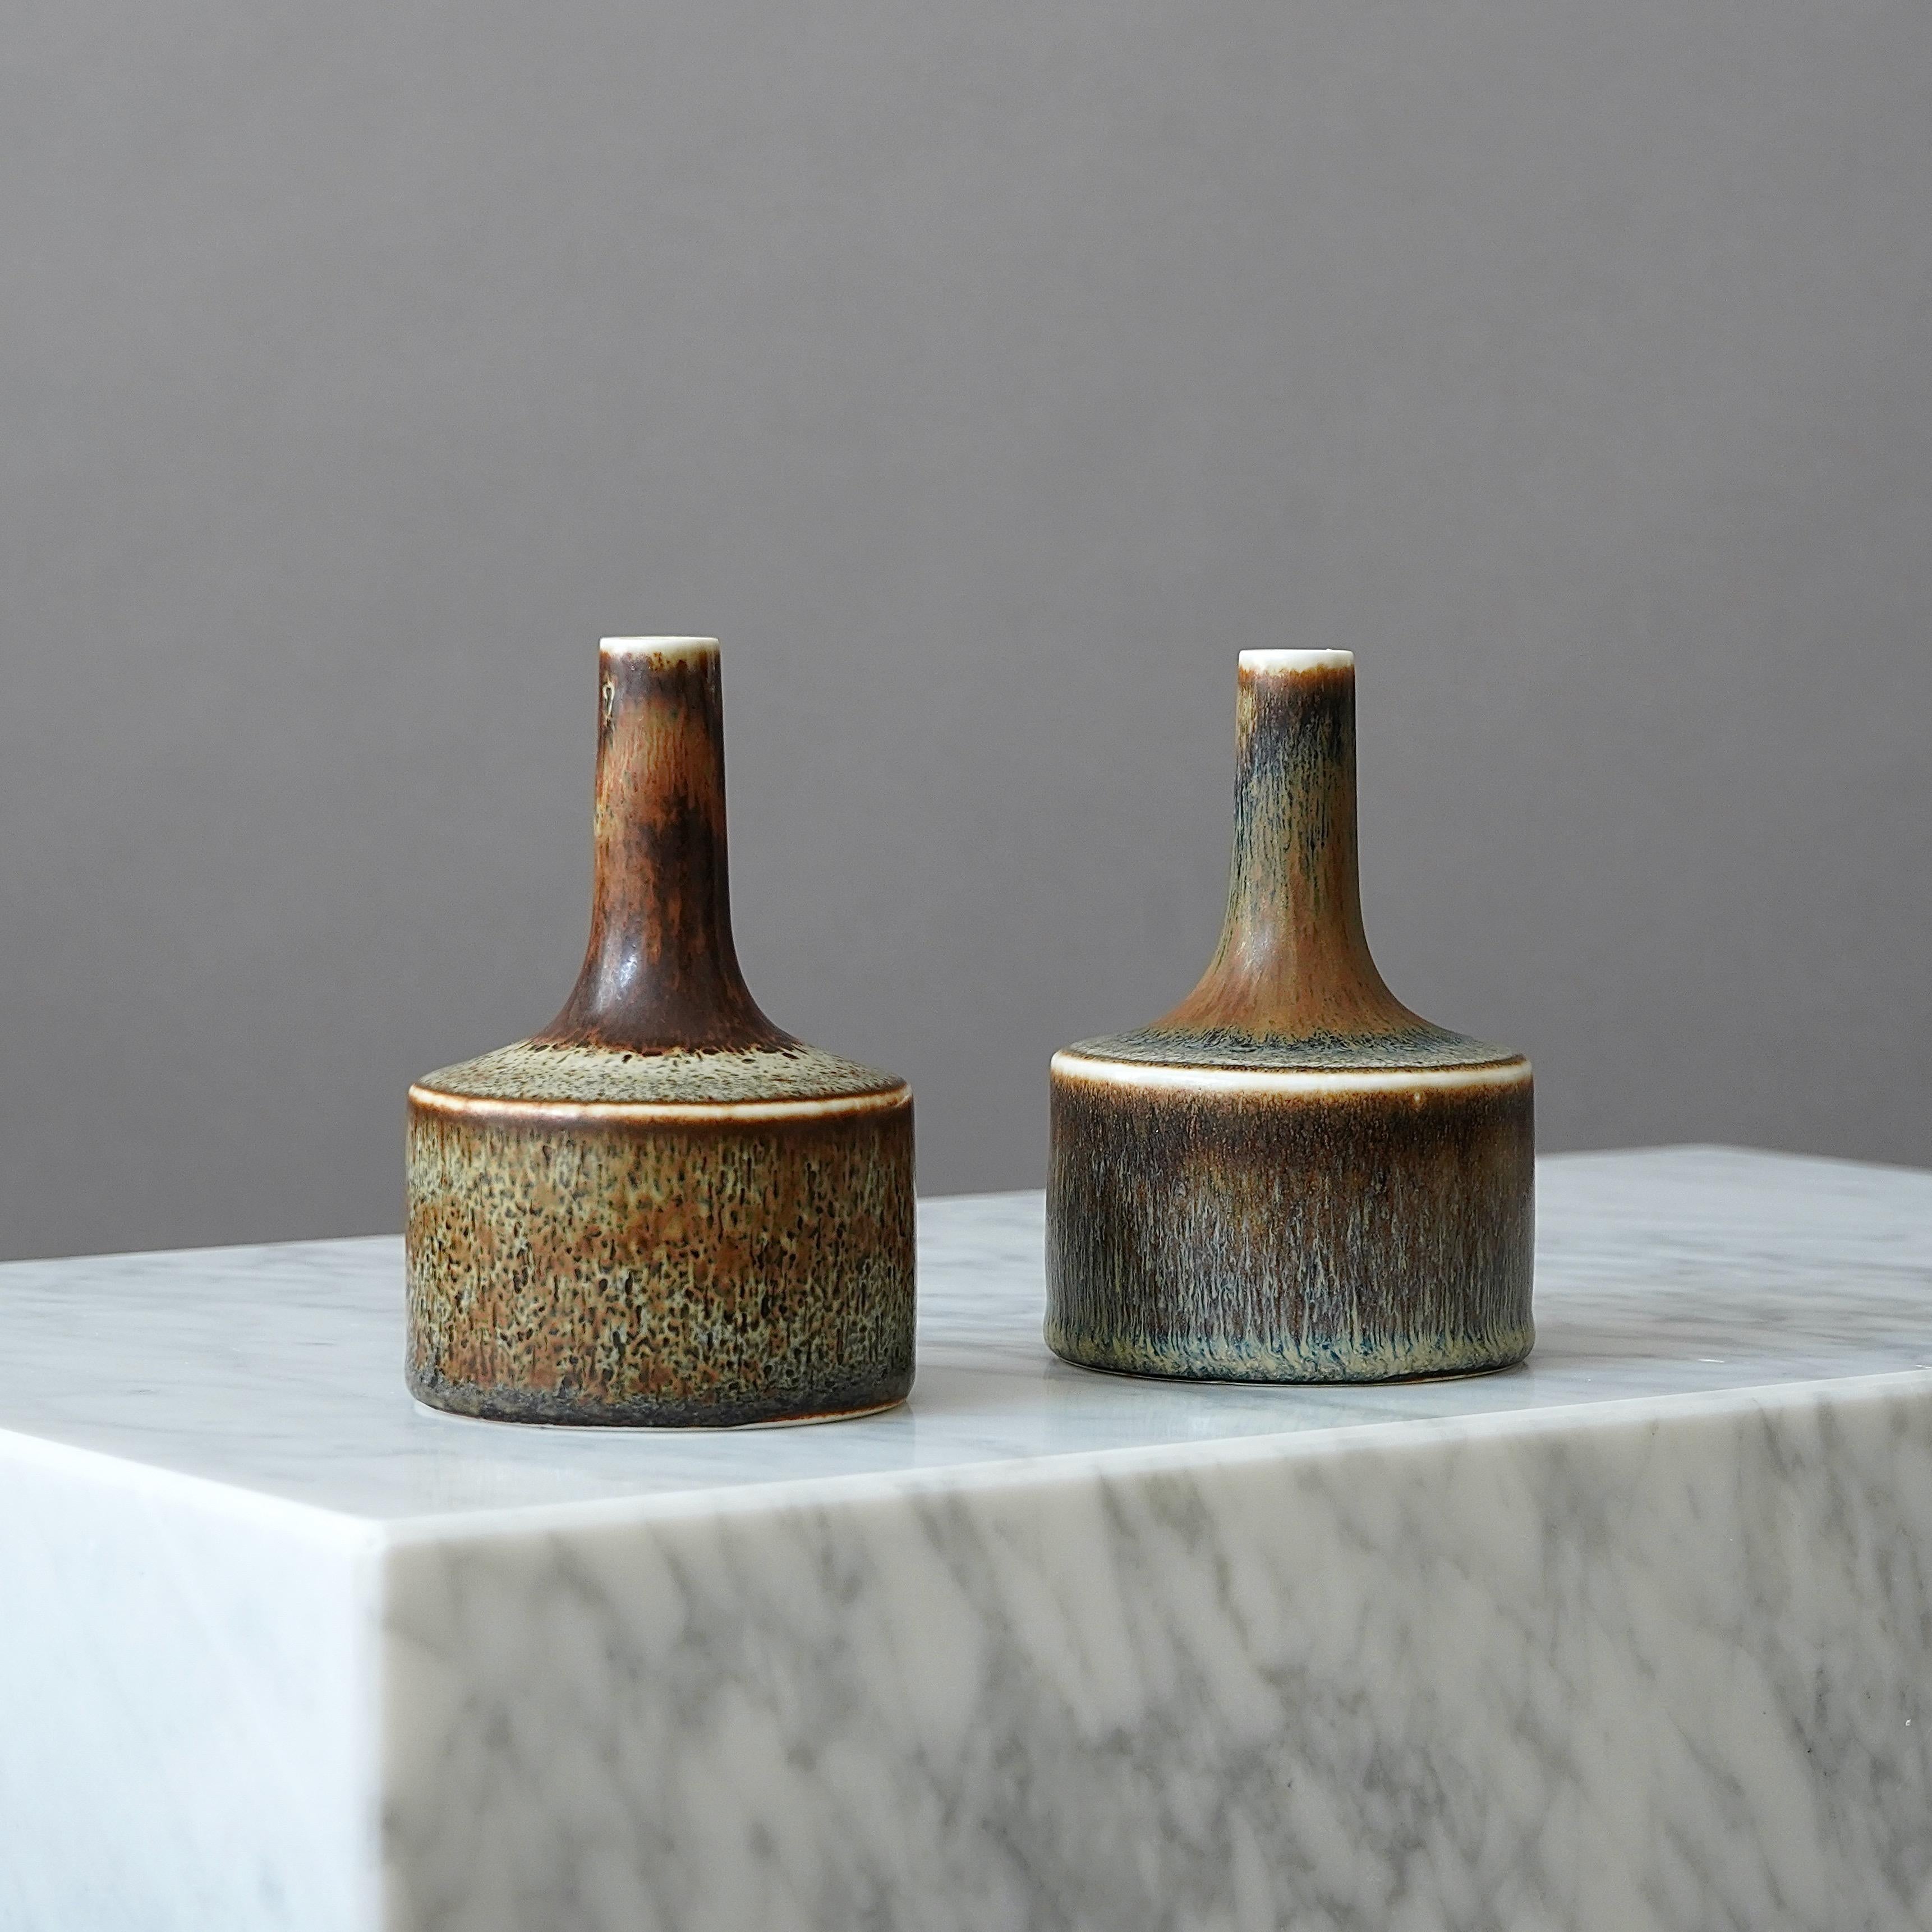 Swedish Pair of Stoneware Vases by Carl-Harry Stalhane, Rorstrand, Sweden, 1950s For Sale